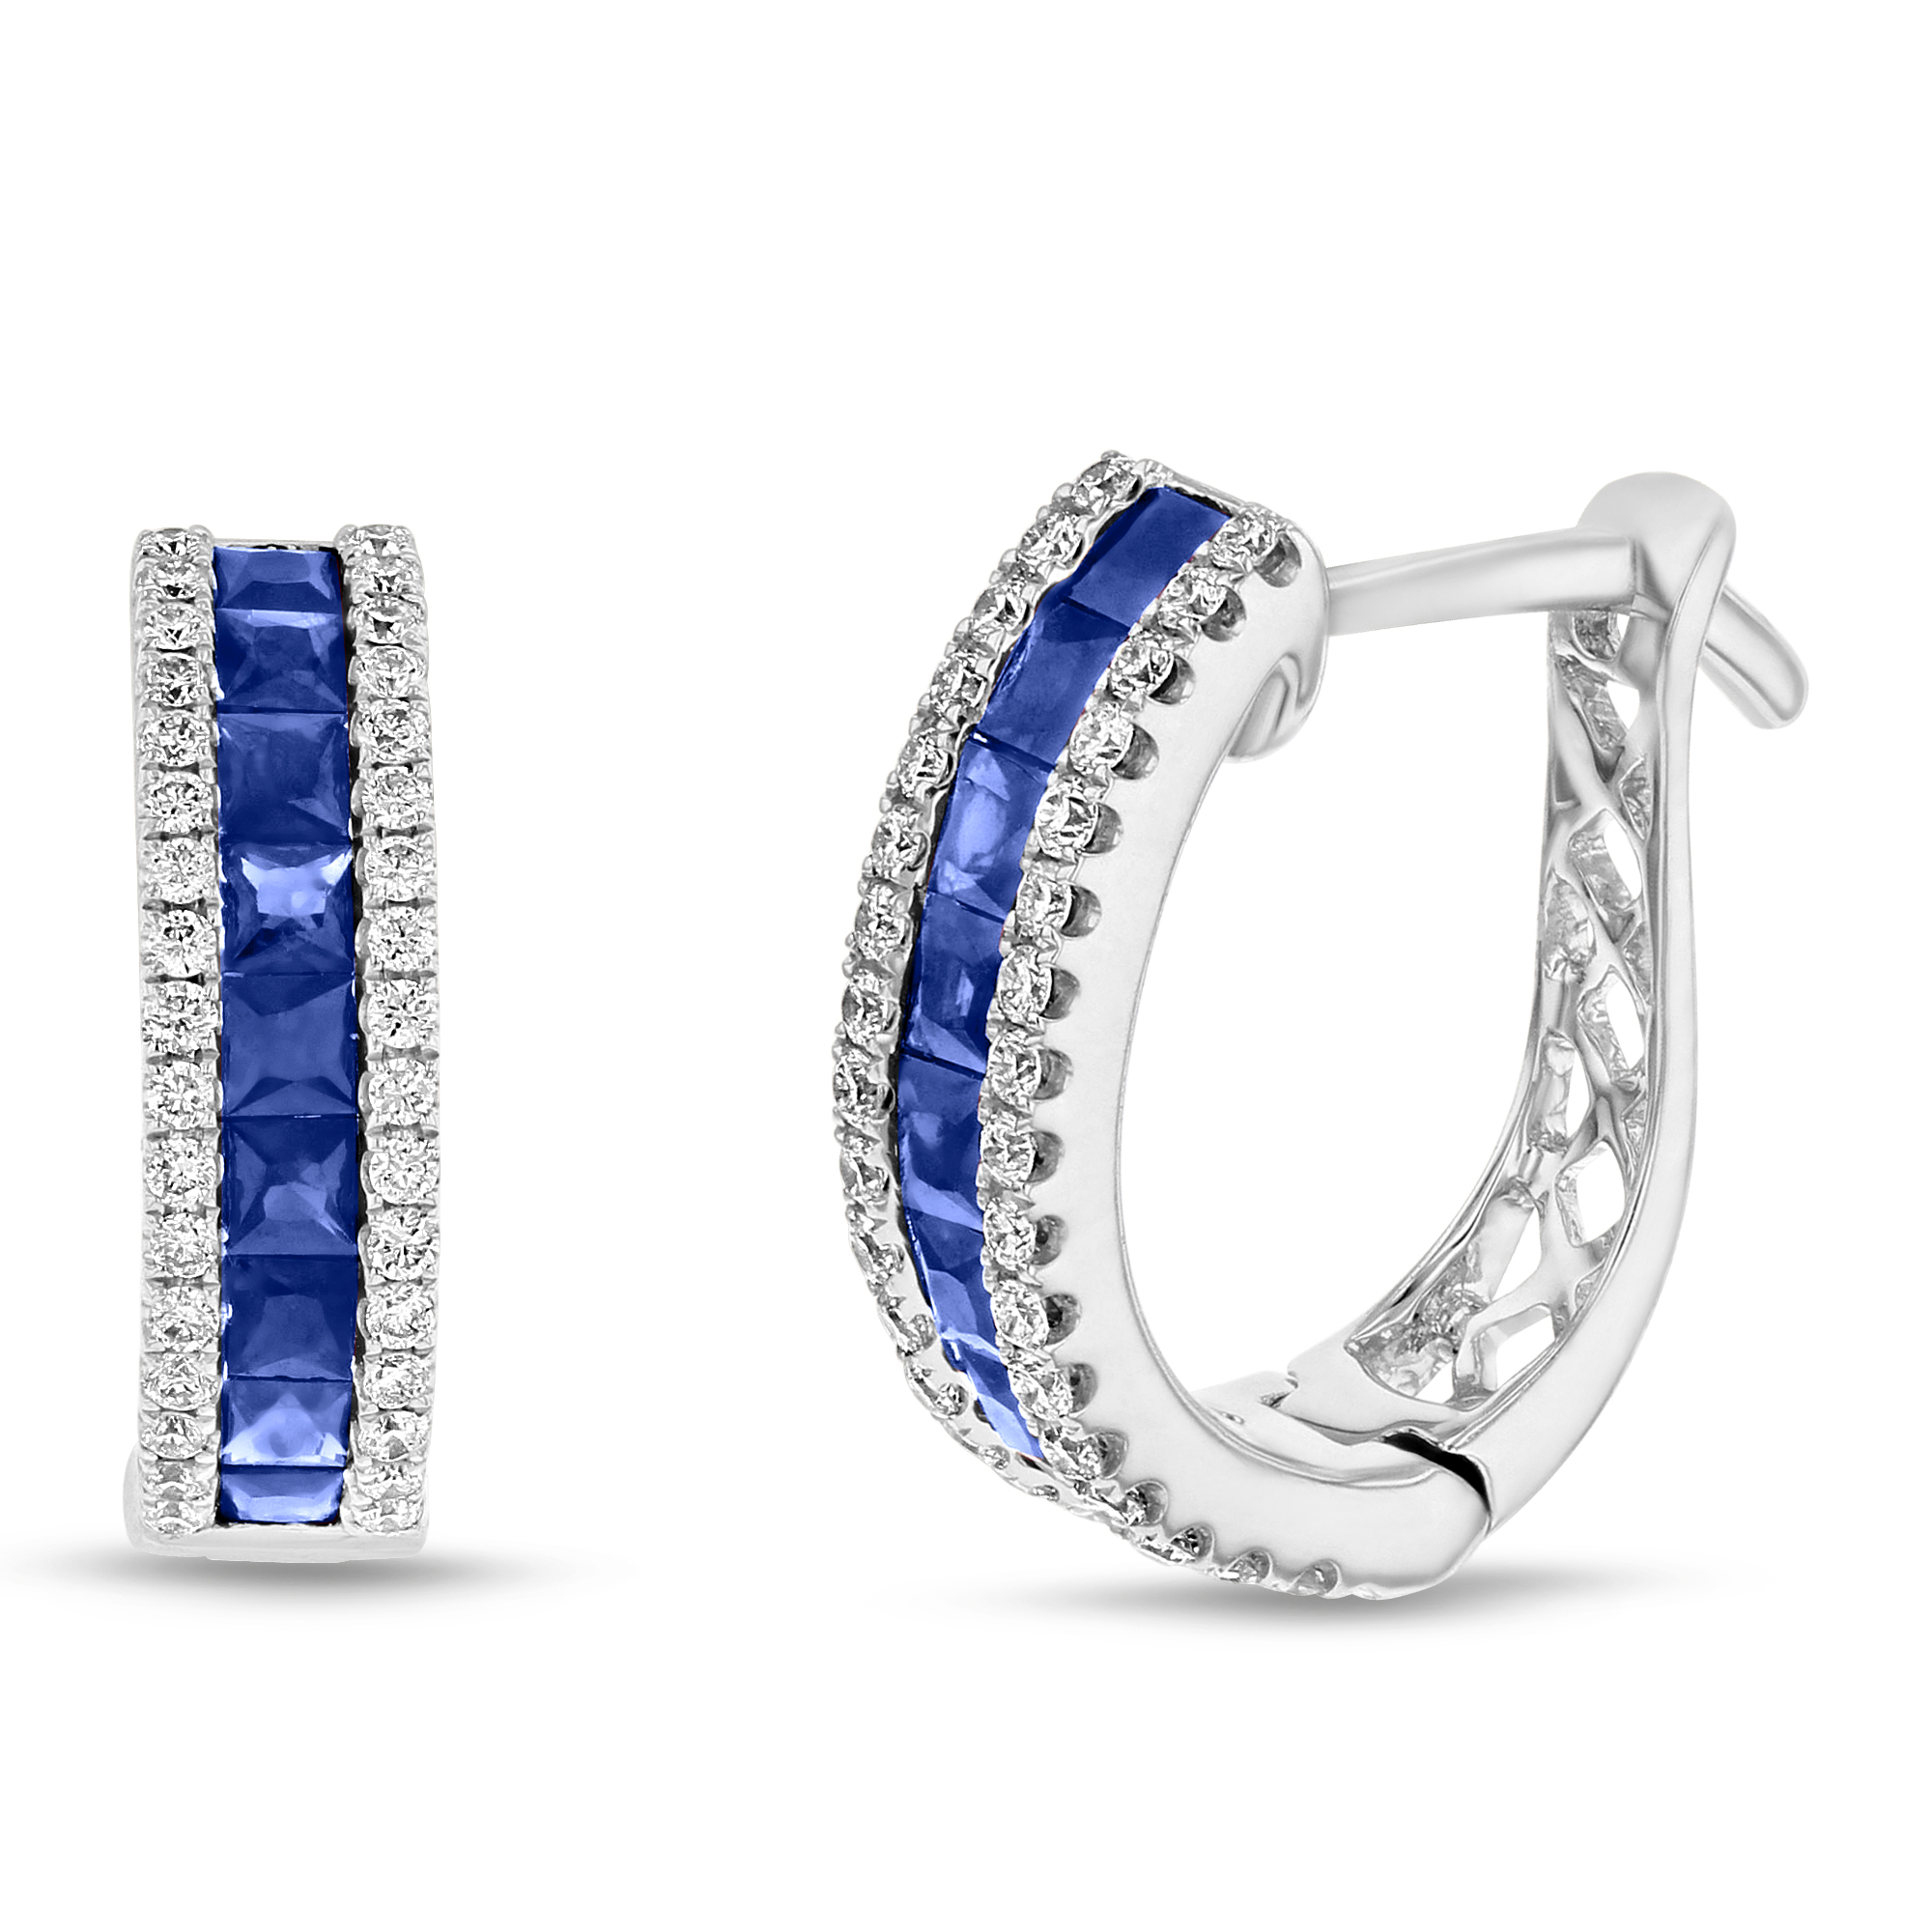 View 0.25ctw Diamonds and Sapphire Hoop Earring in 18k White Gold